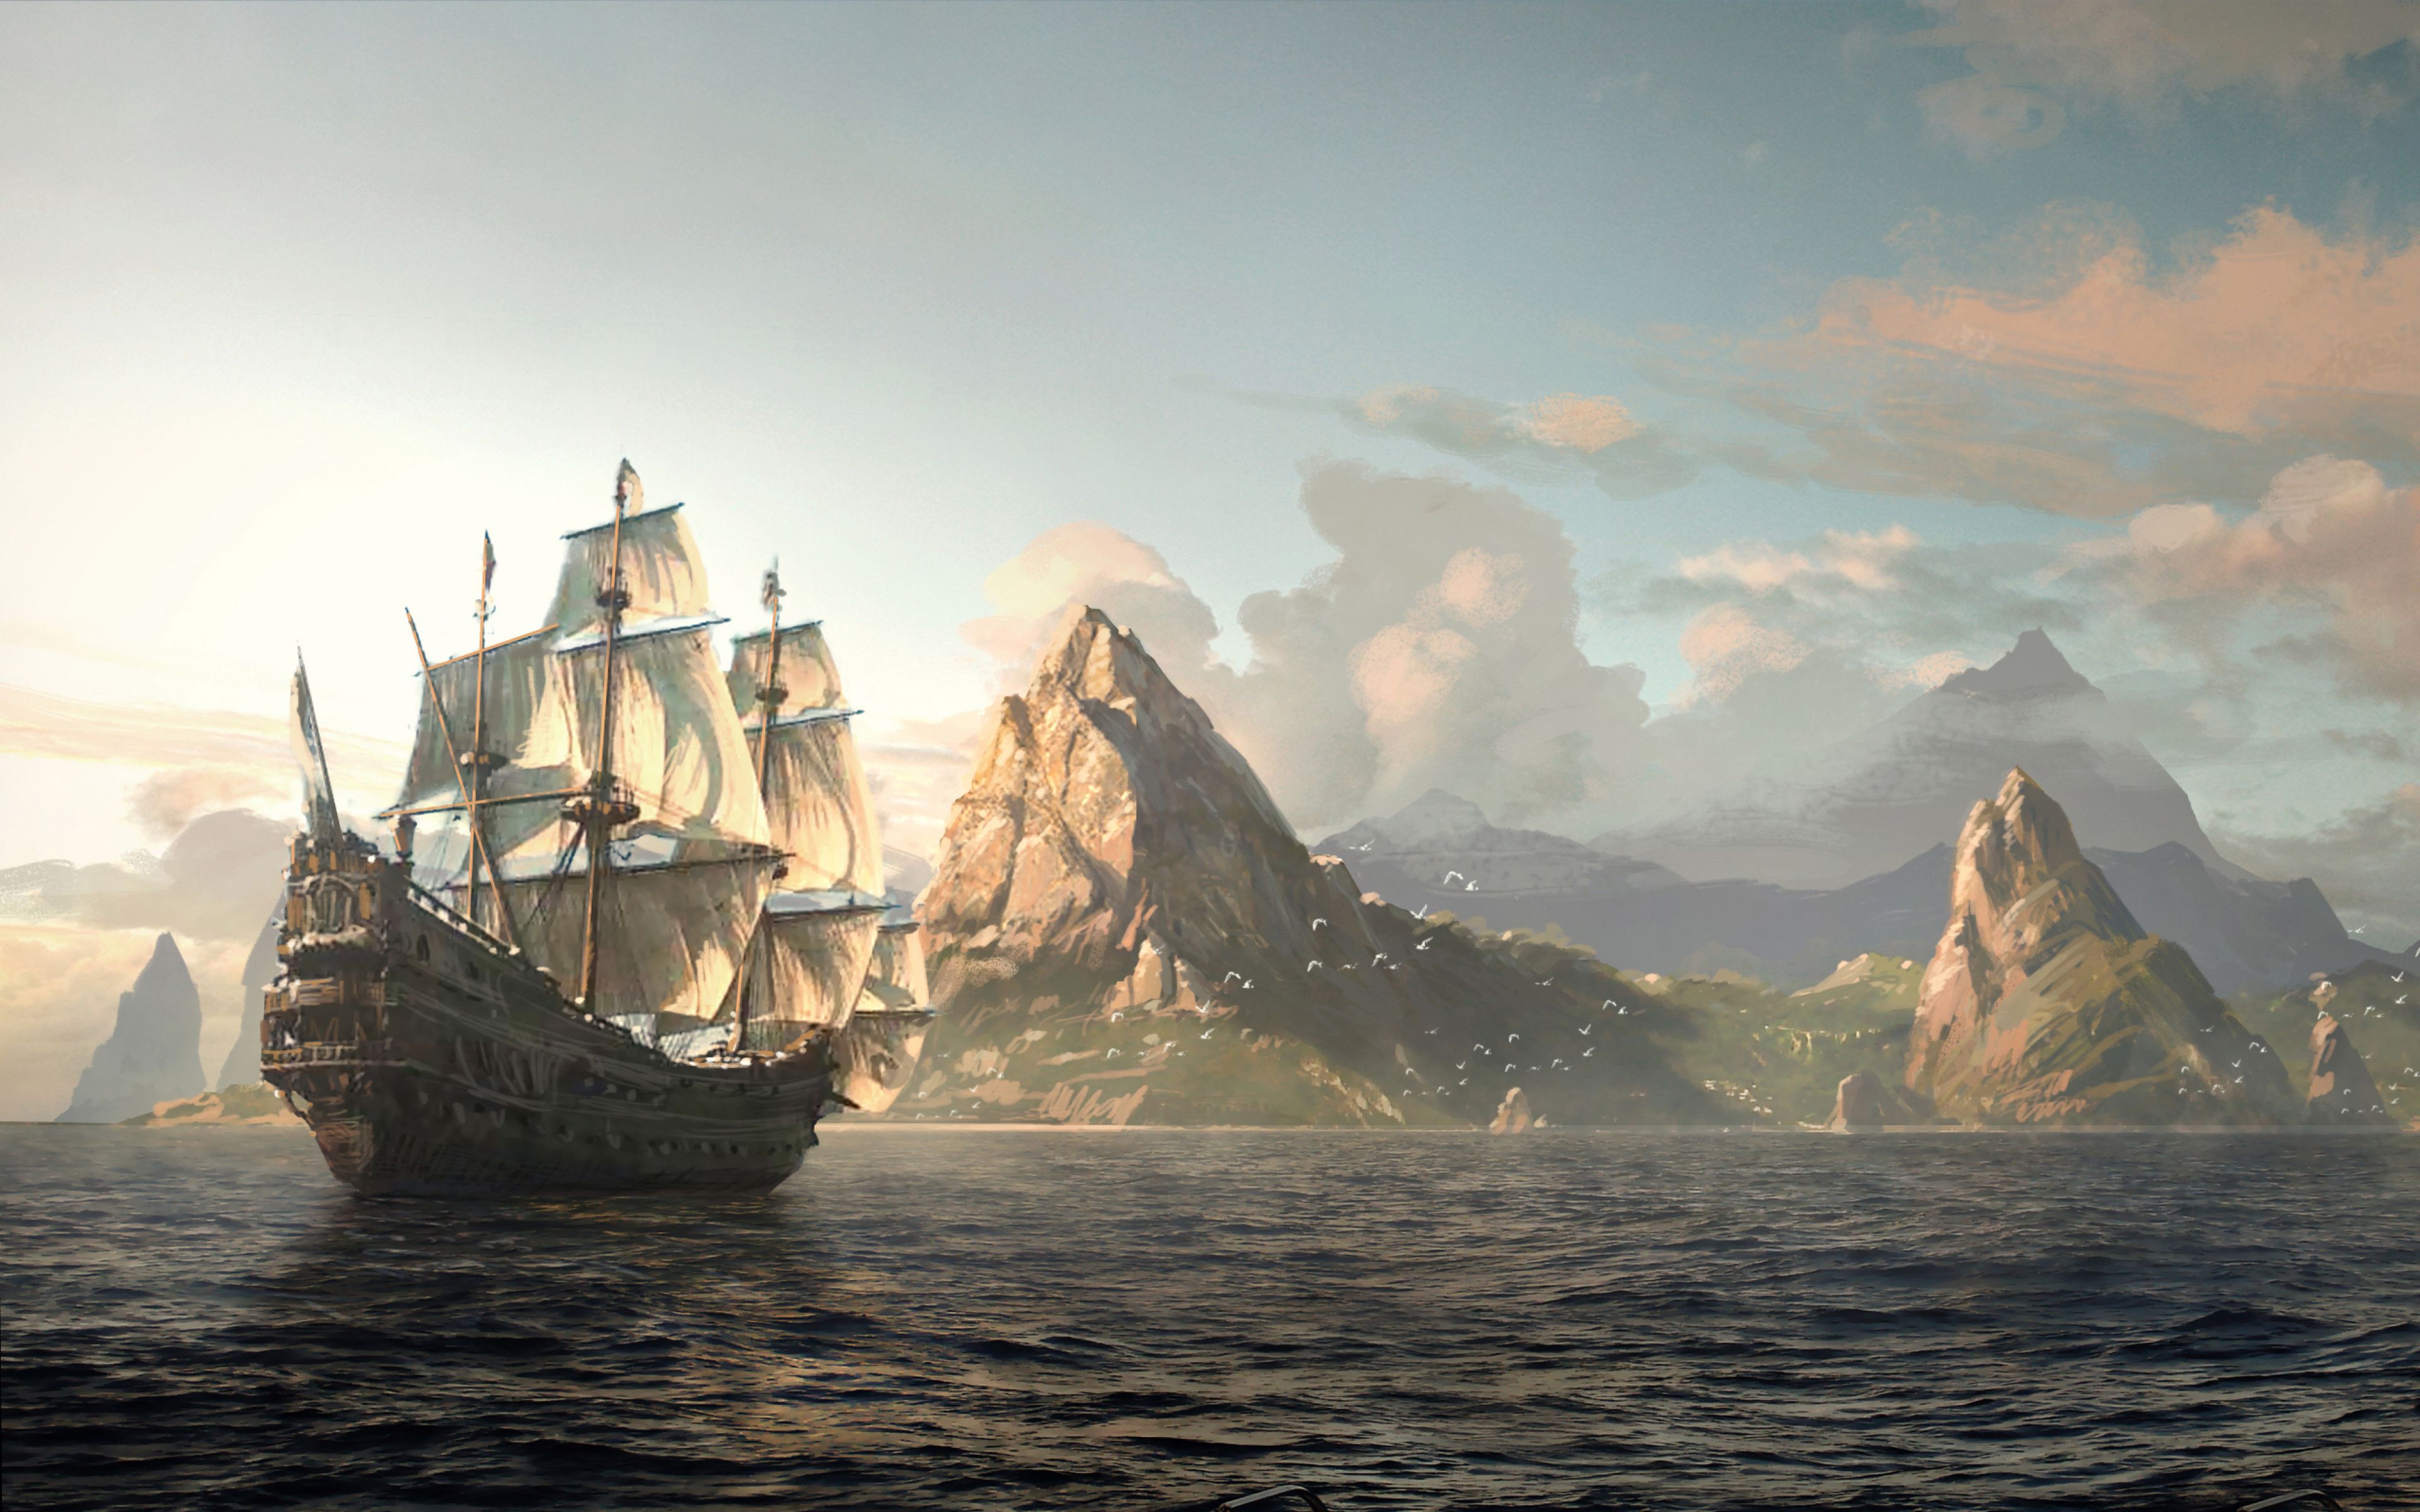 An old pirate ship sails through the ocean in front of a rocky island. - Pirate